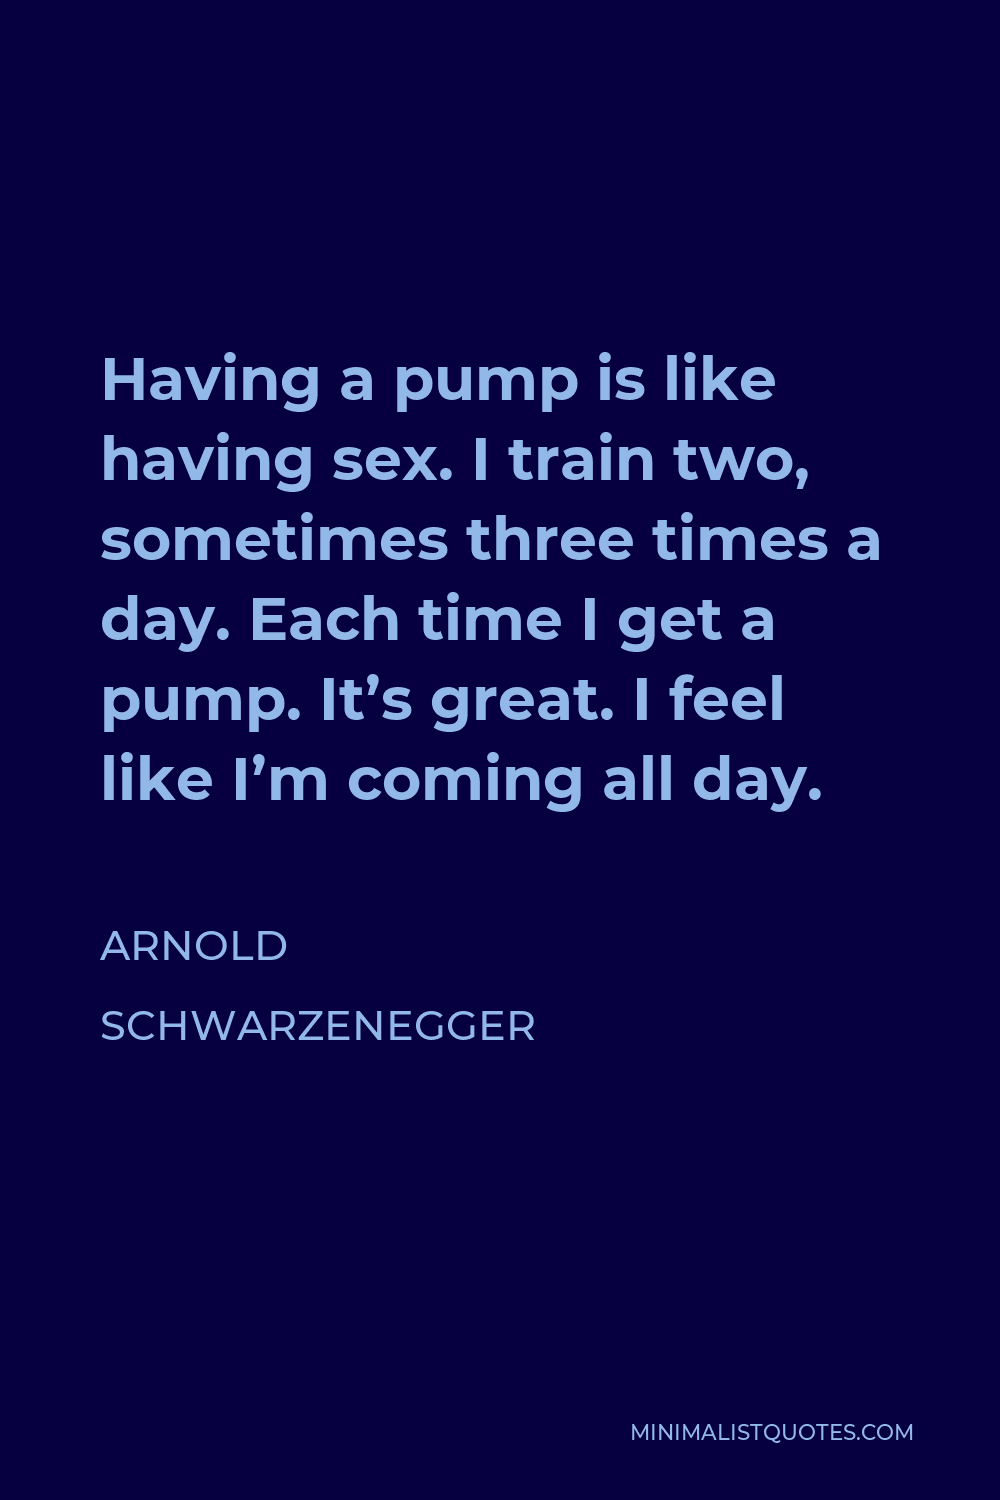 Arnold Schwarzenegger Quote - Having a pump is like having sex. I train two, sometimes three times a day. Each time I get a pump. It’s great. I feel like I’m coming all day.